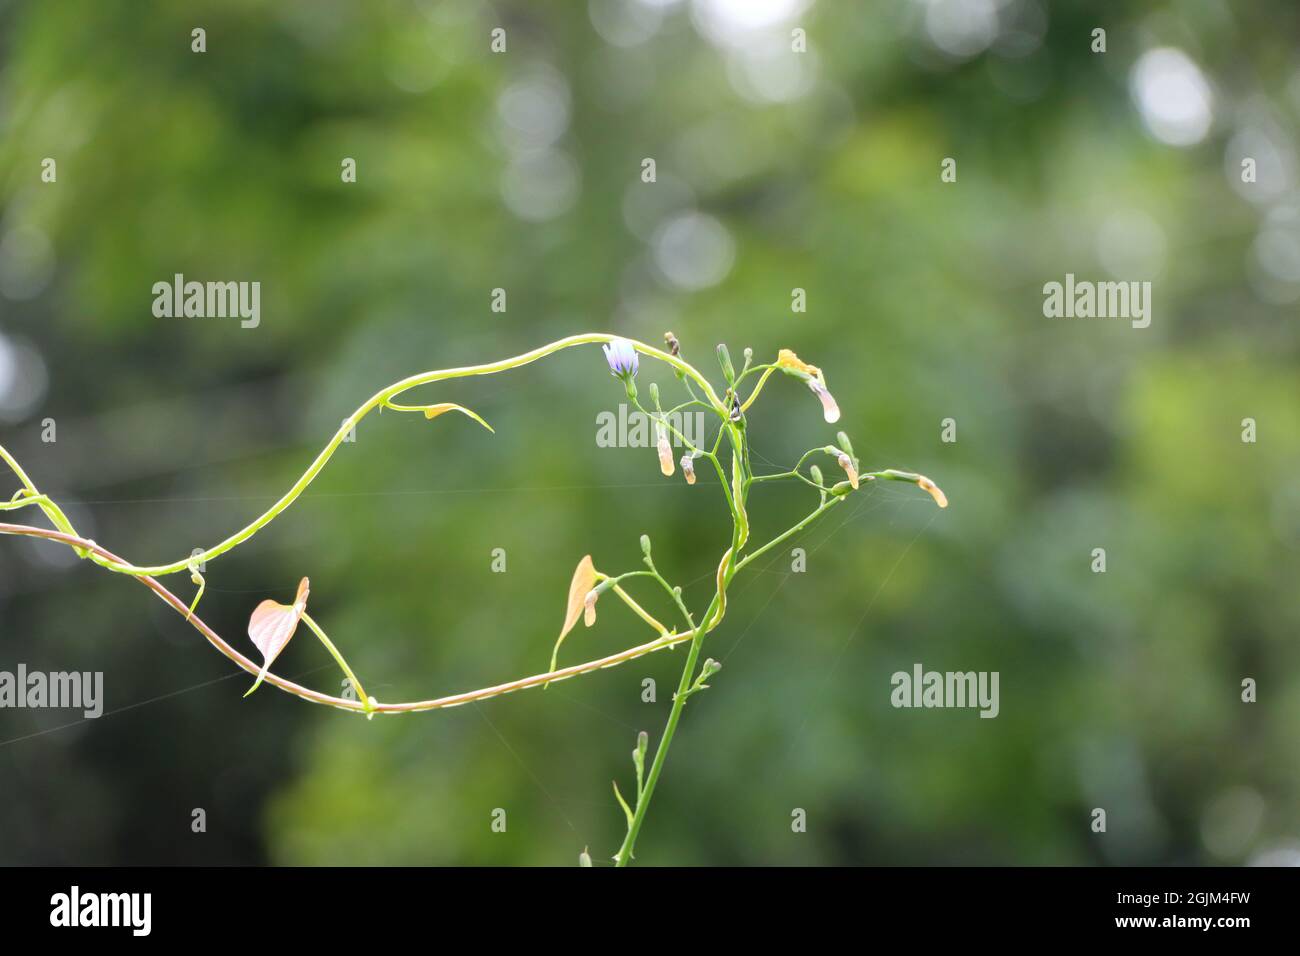 Closeup shot of blooming Thale cress plant Stock Photo